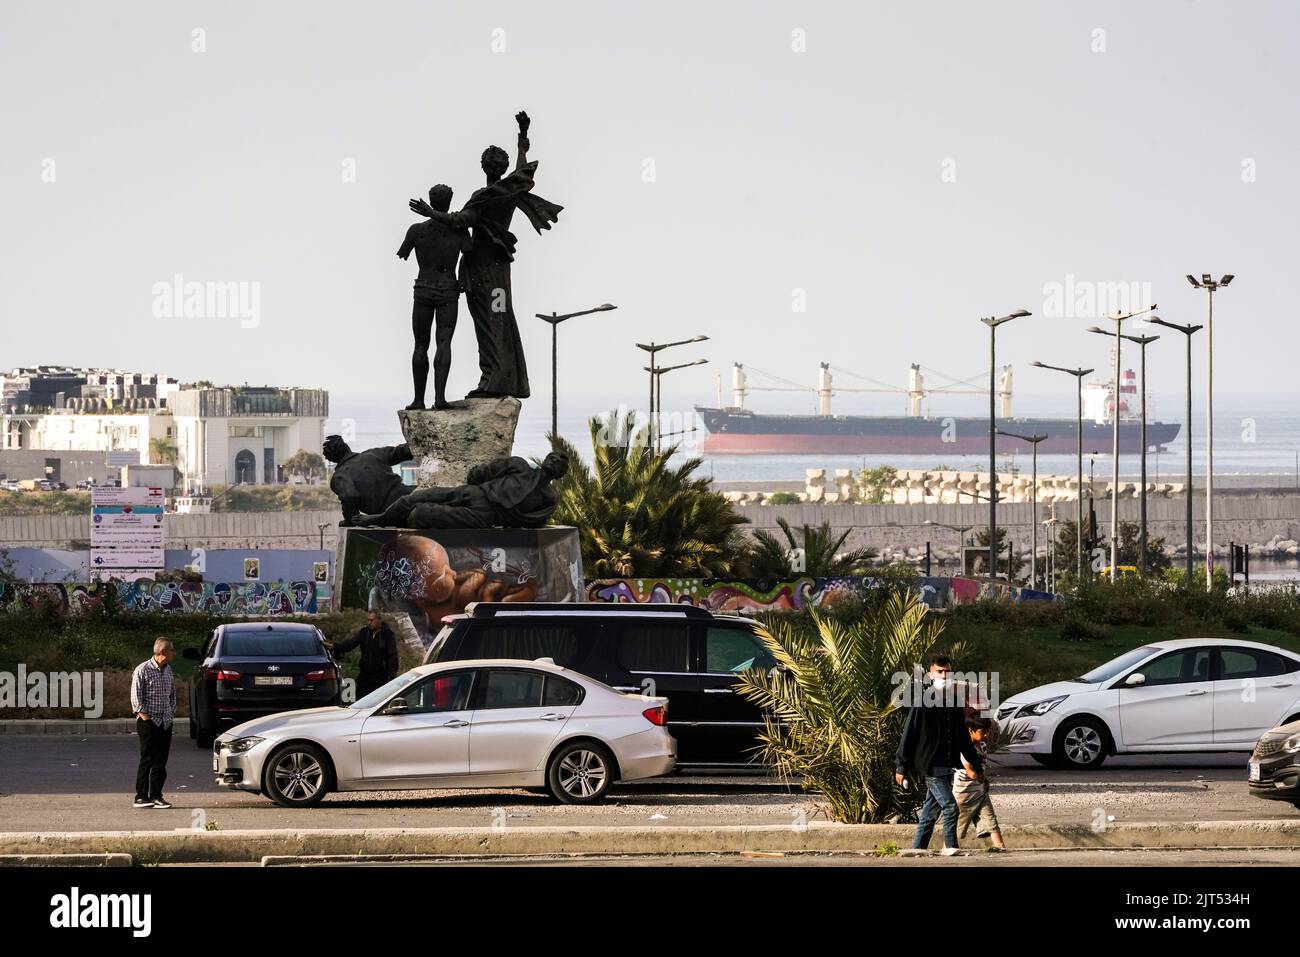 Beirut, Lebanon: The Martyrs statue in Martyrs Square, monument commemorating the martyrs executed by the Ottomans, riddled with bullet holes from the Lebanese Civil War, Martyrs' Square, downtown Beirut, Lebanon Stock Photo